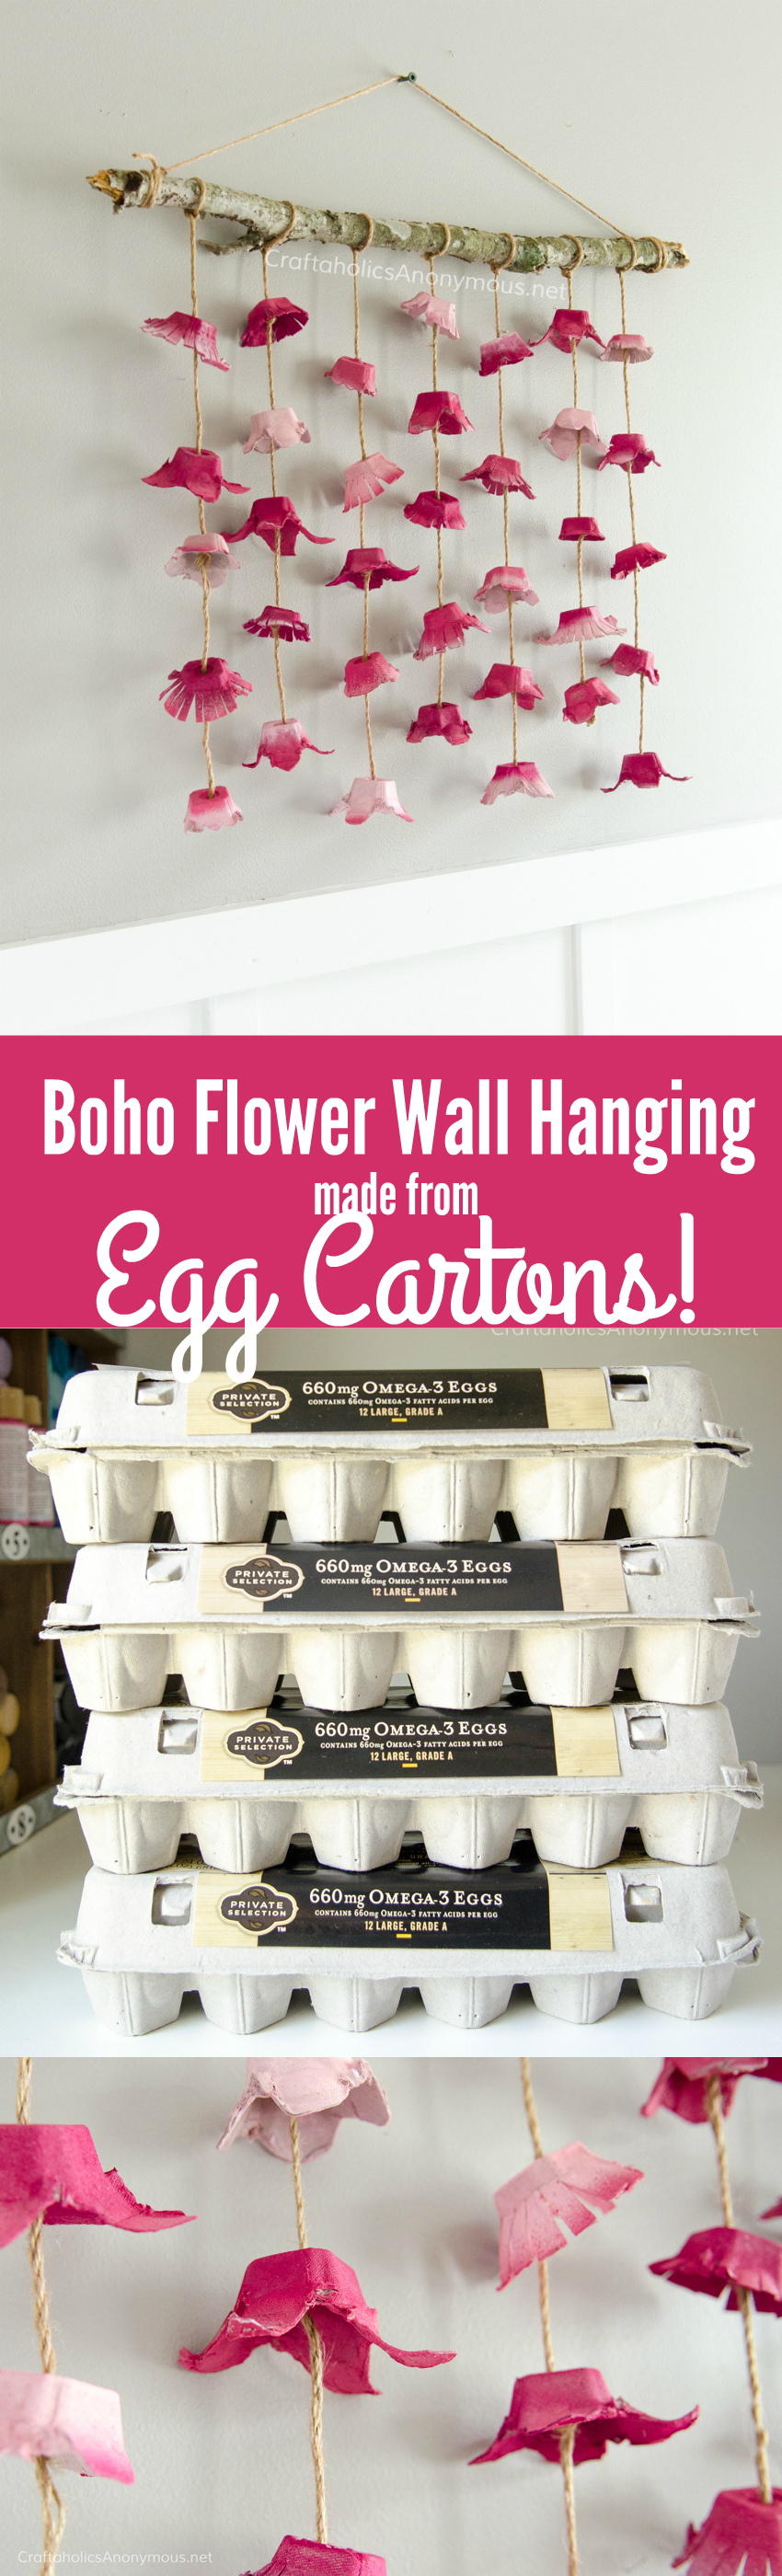 DIY Boho Flower Wall hanging made with old egg cartons. Great way to reuse empty egg cartons! Neat craft idea.